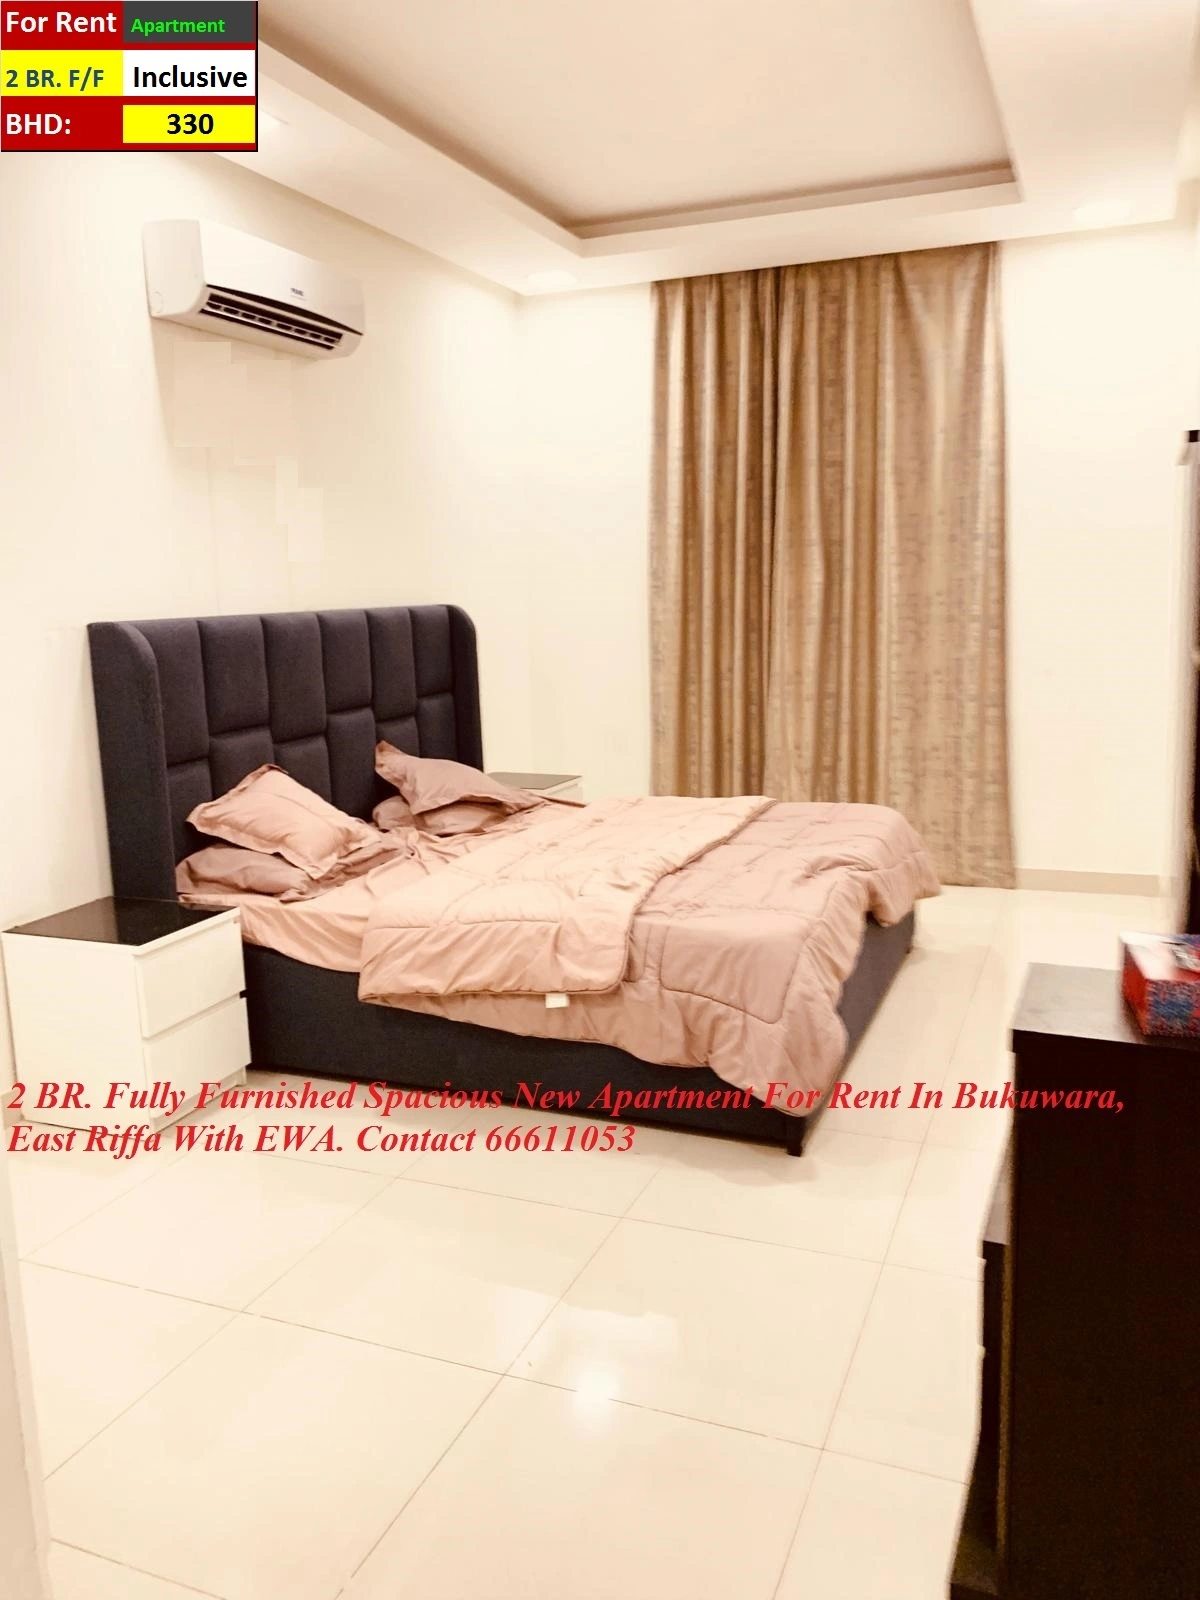 2 BR.Fully Furnished Spacious New Apartment for Rent in Bukuwara,Riffa